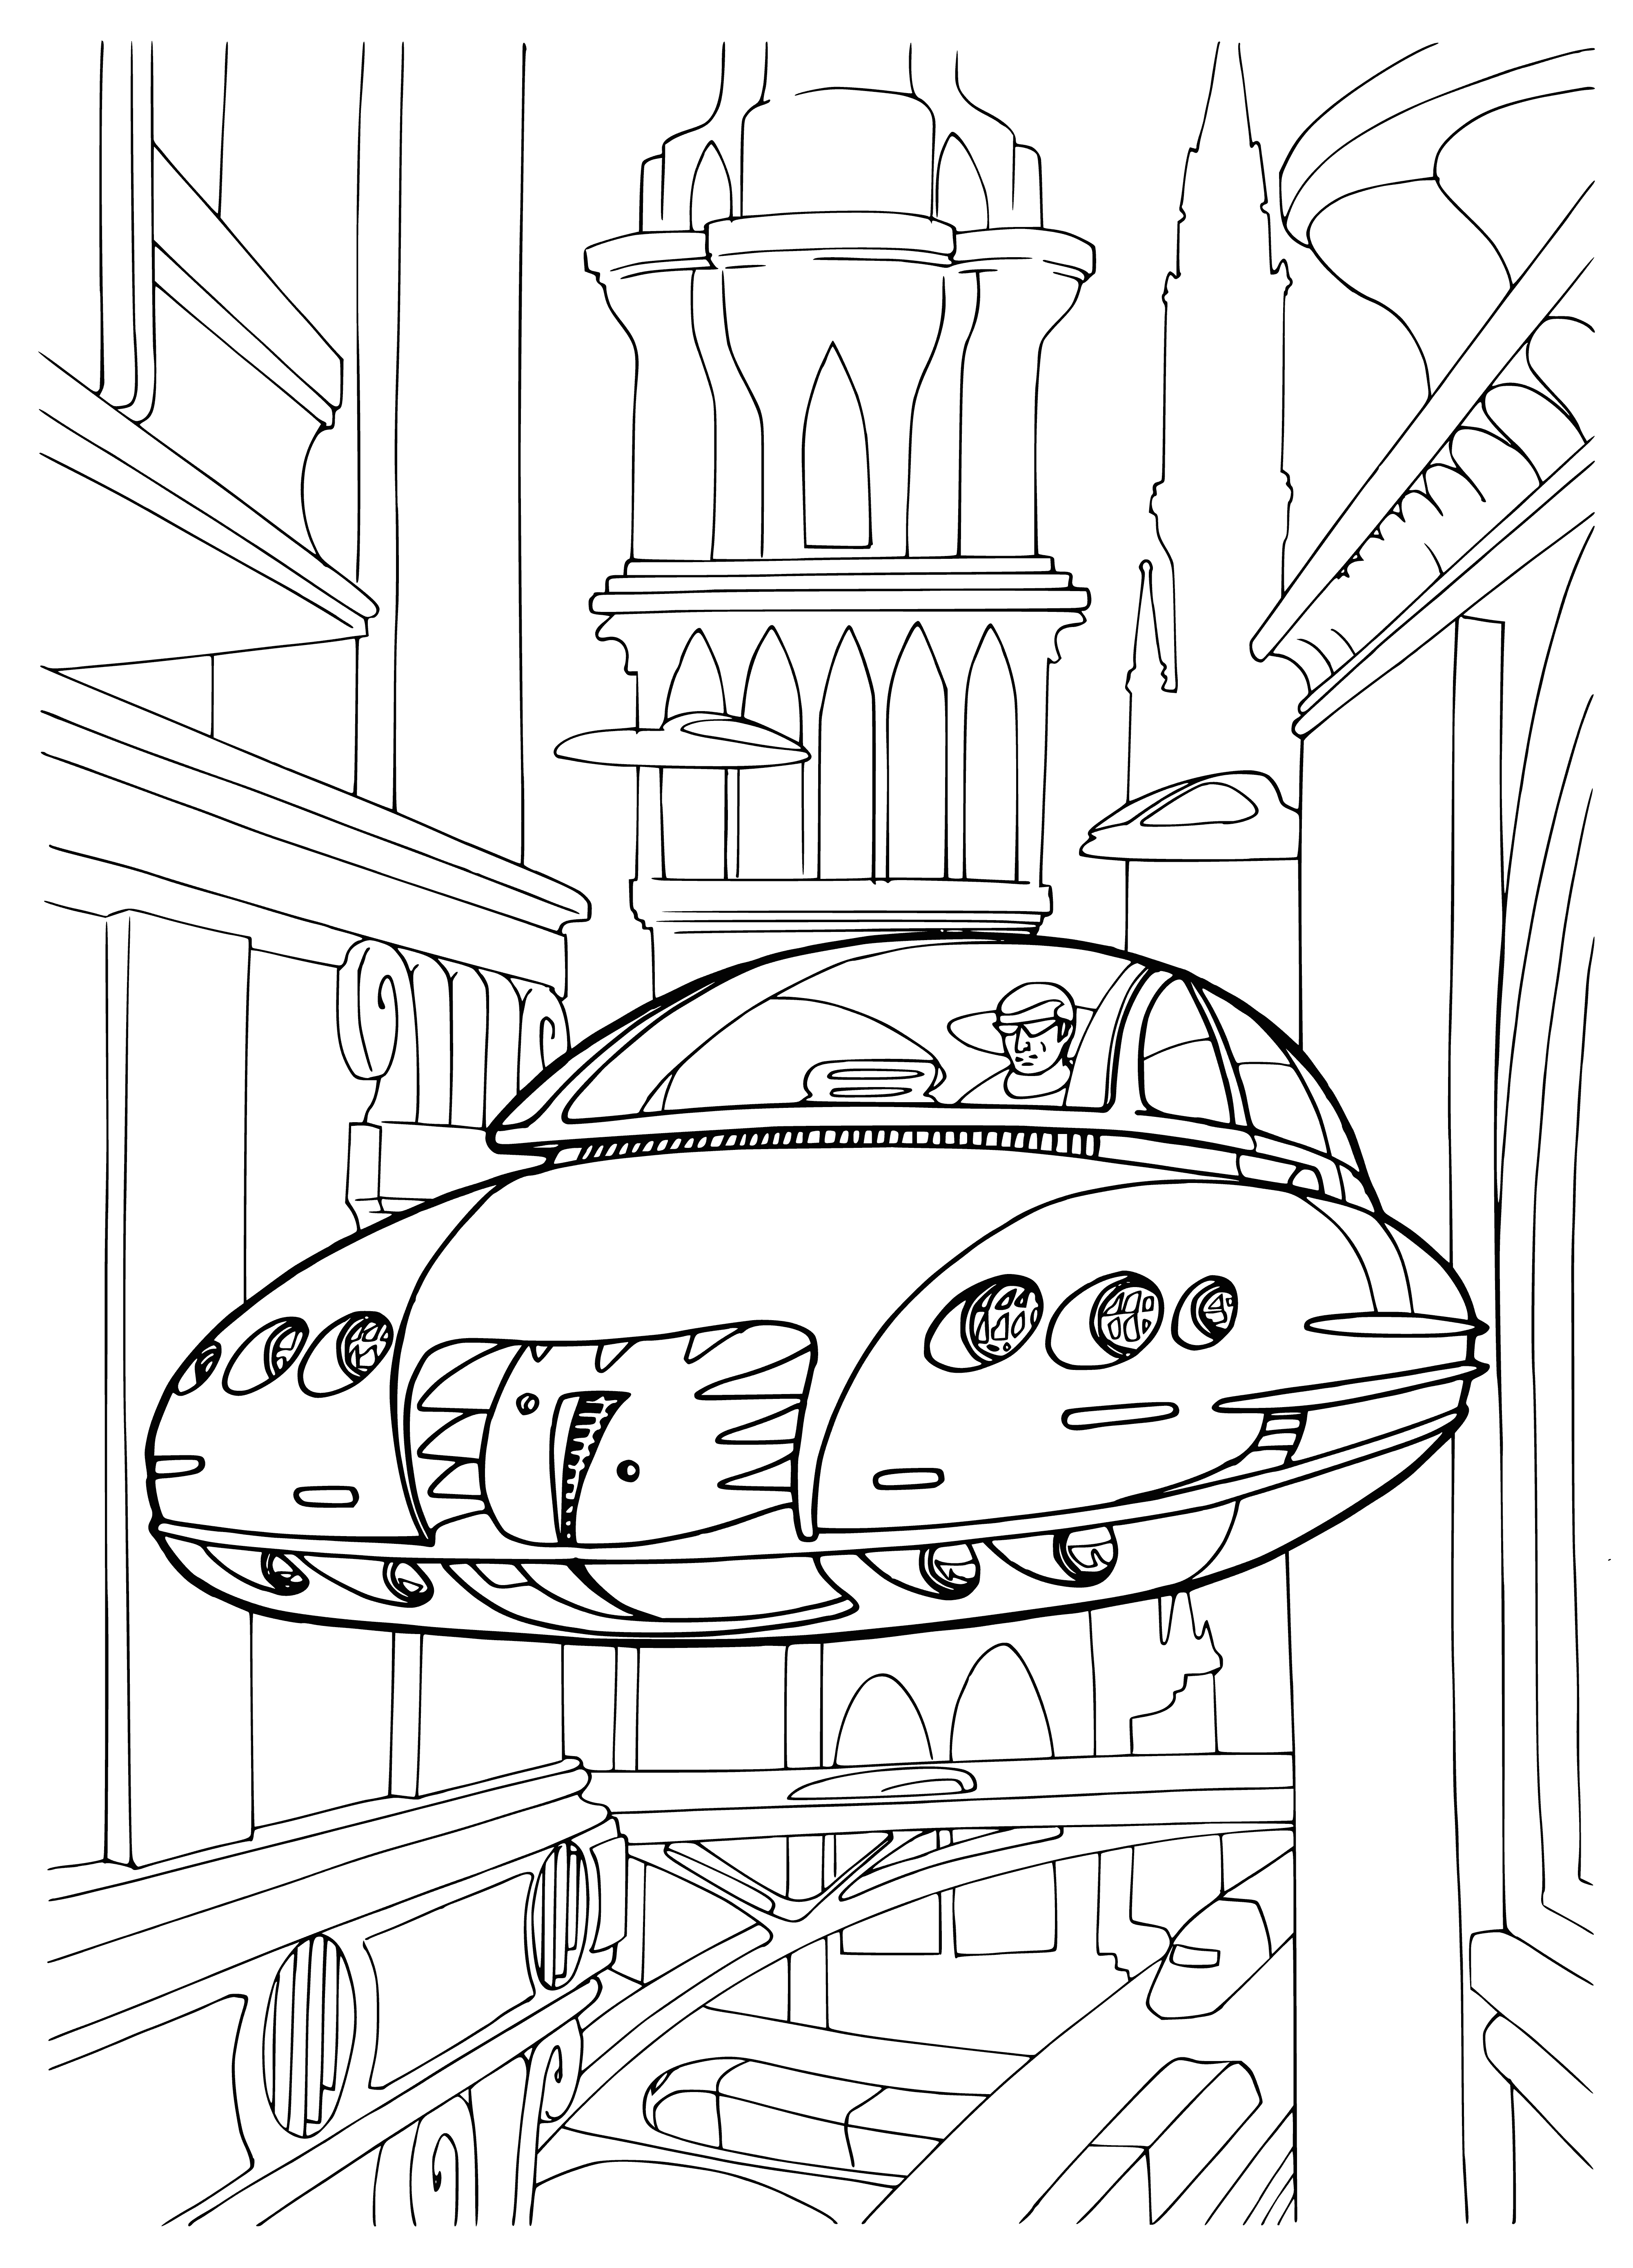 coloring page: An airborne, wheel-less craft that glows blue with a side panel. Control panel may be inside.